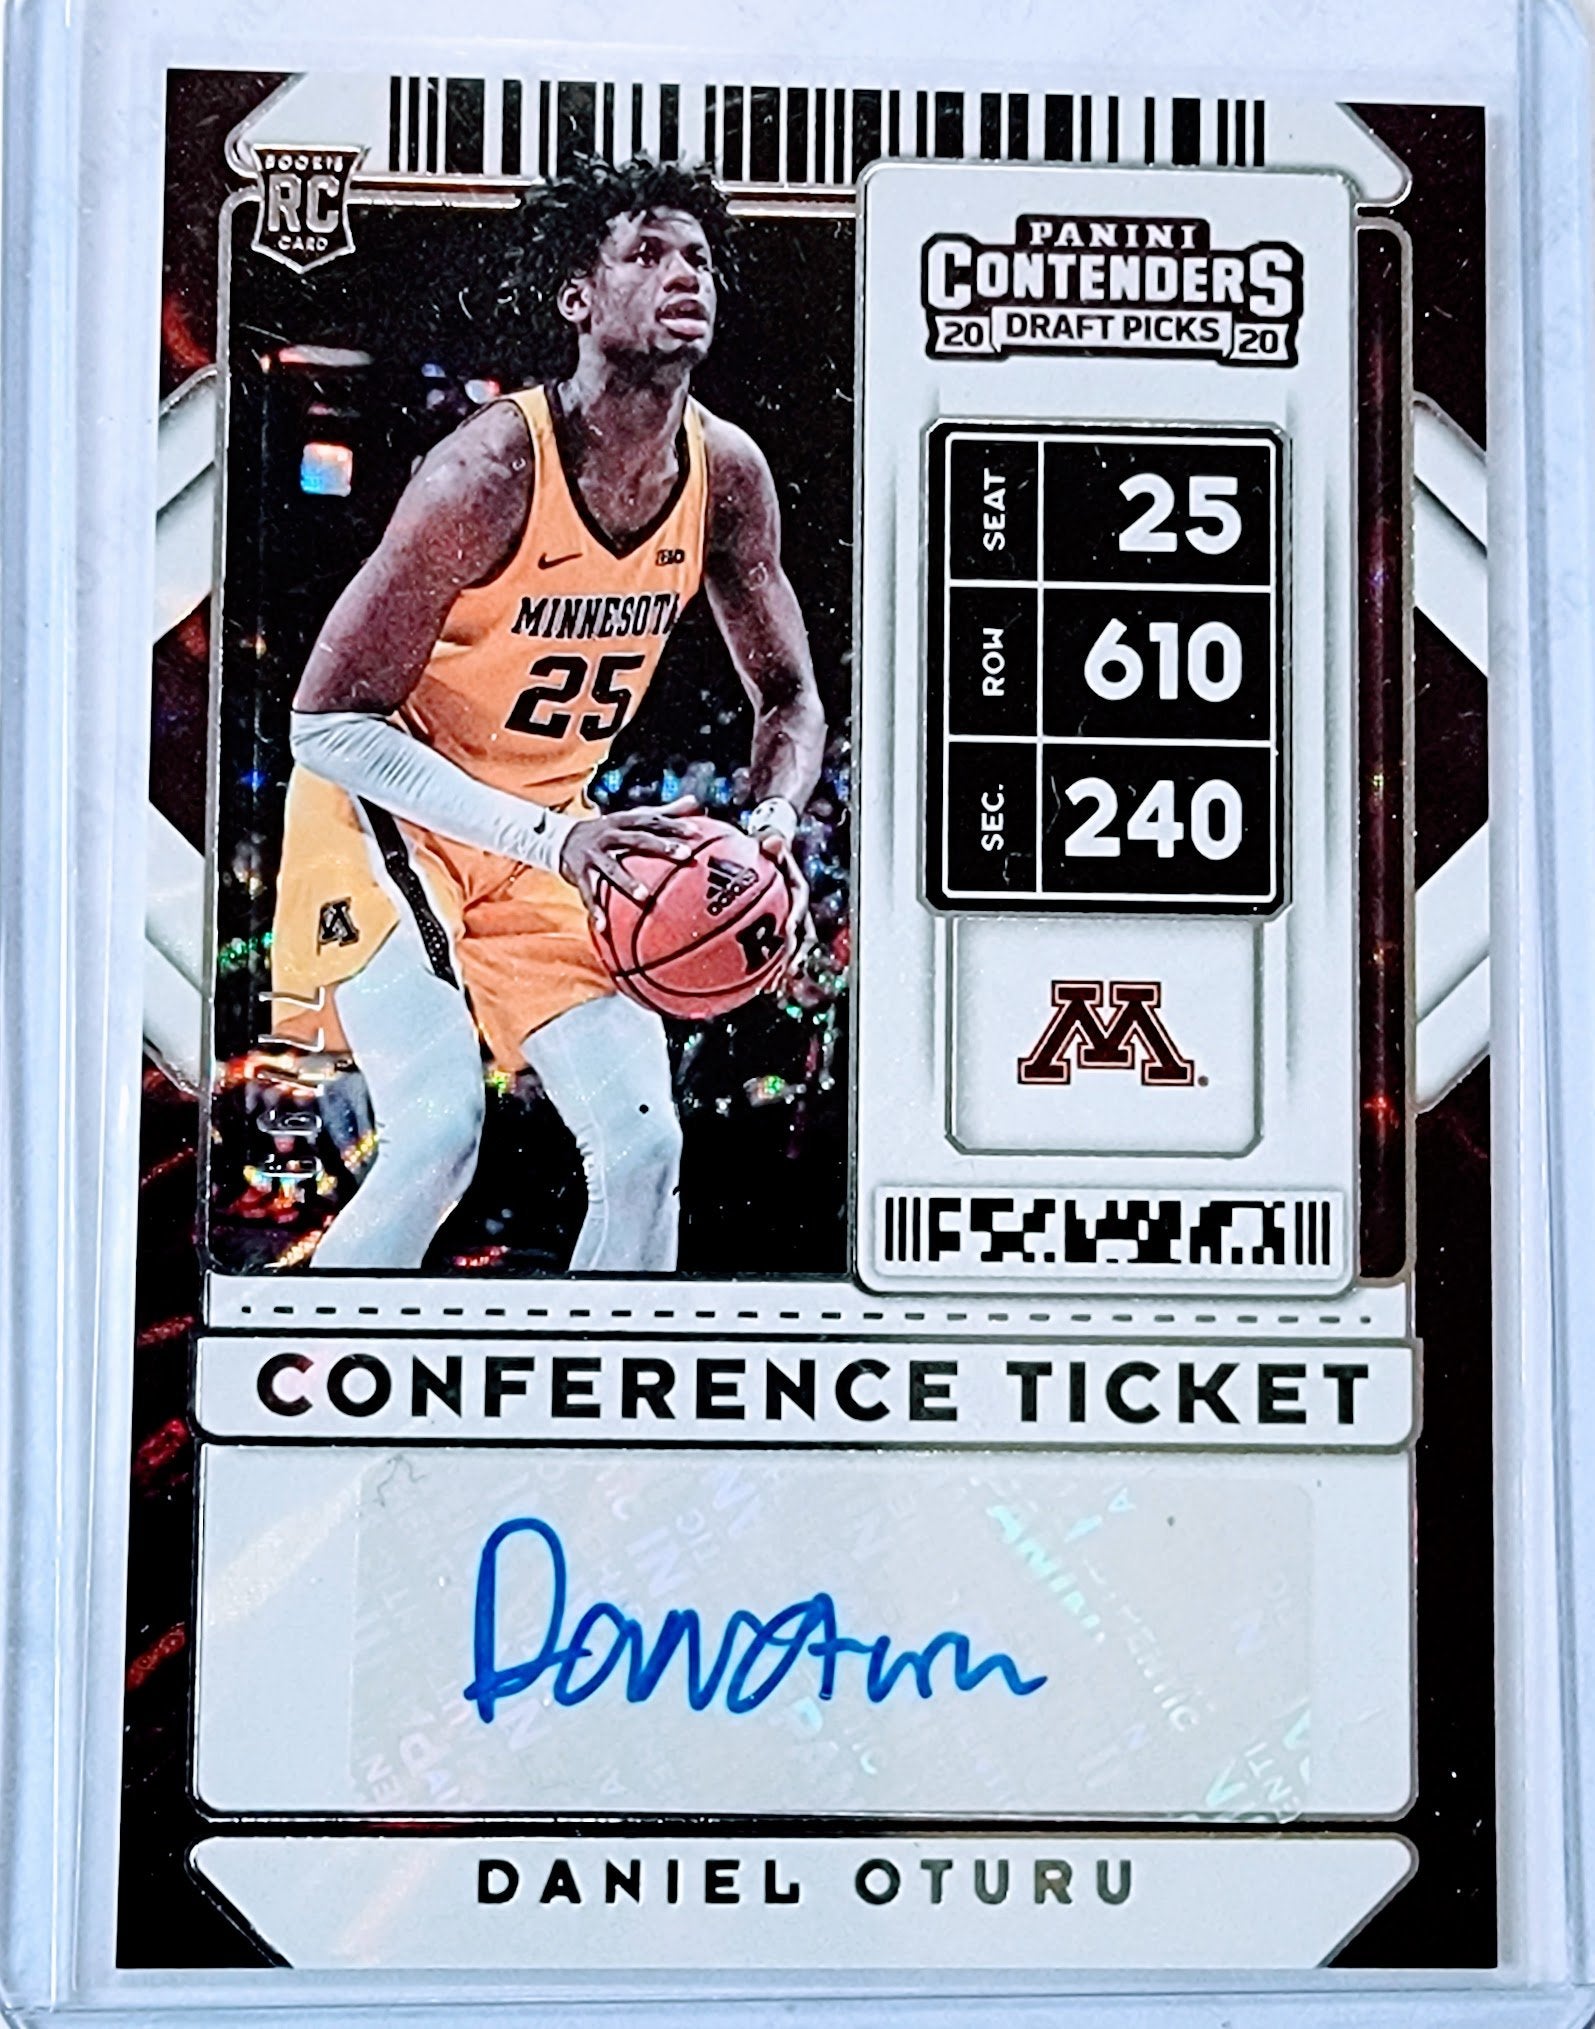 2020 Panini Contenders Daniel Oturu #'d/99 Autographed Conference Ticket Basketball Card simple Xclusive Collectibles   